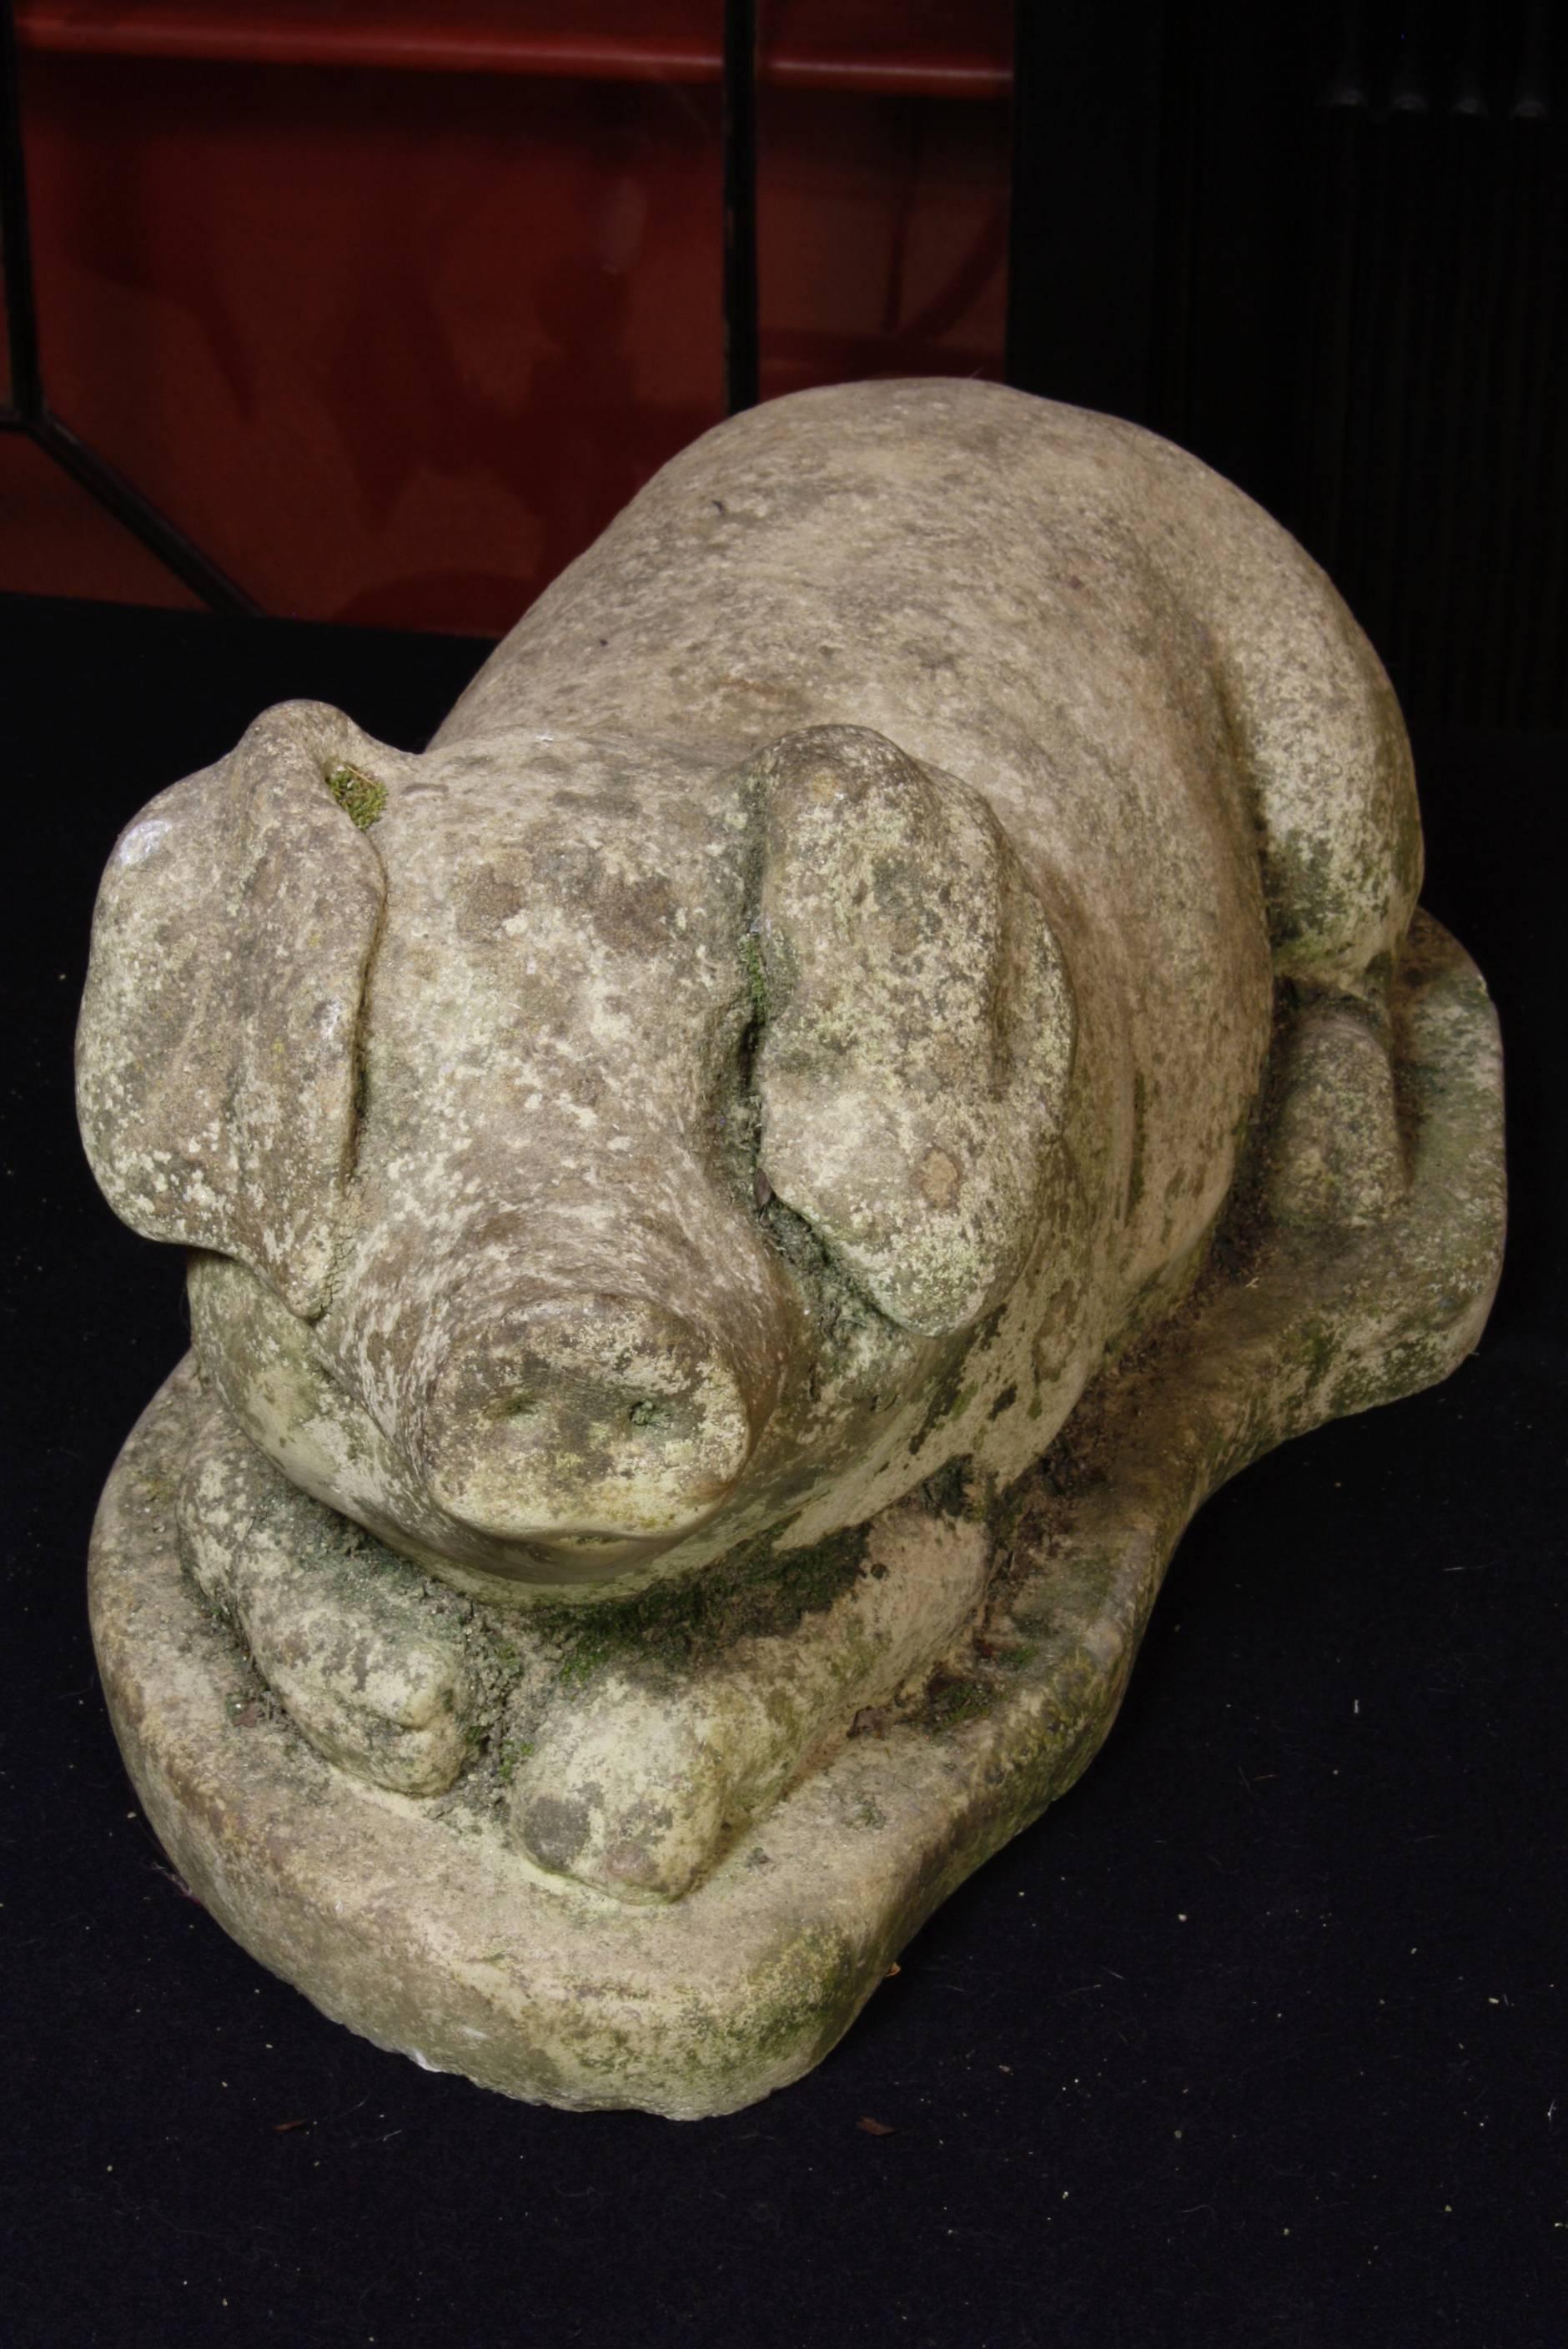 Very cute French reclining pig in composite stone (late 19th-early 20th century). This adorable guy appears to be smiling, with large floppy ears covered his eyes and a small curly-cue tail at his opposite end. We call him "Truffles".